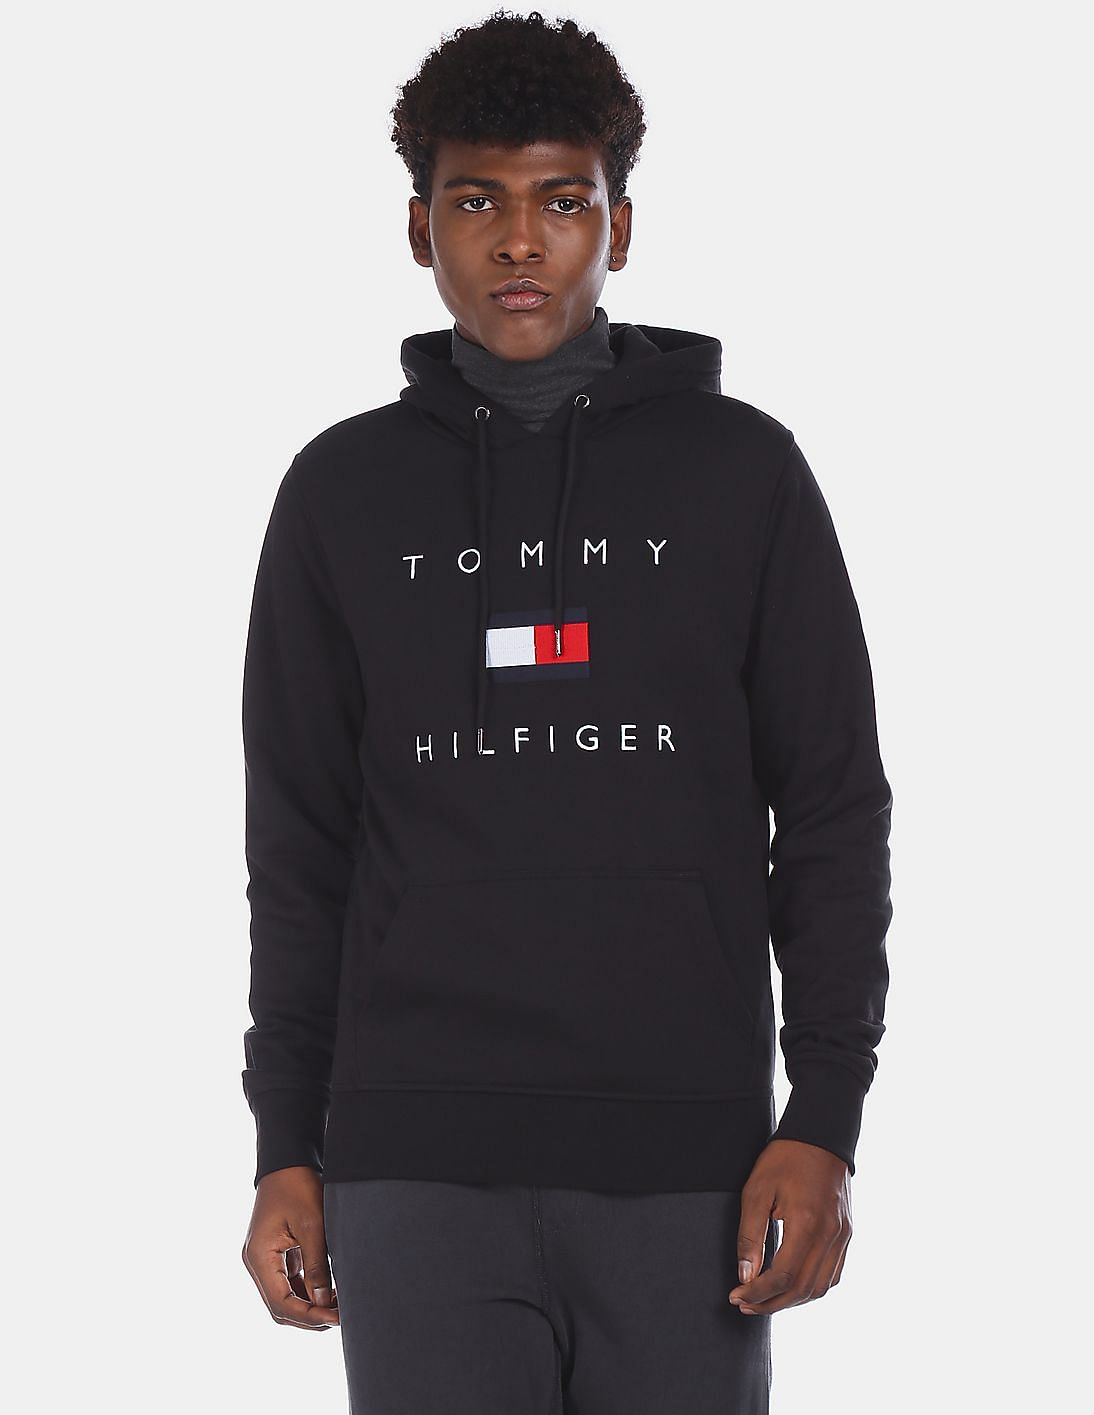 Sudaderas TOMMY HILFIGER Hombre Wcc Monotype Embro Hoody - Guanxe Atlantic  Marketplace